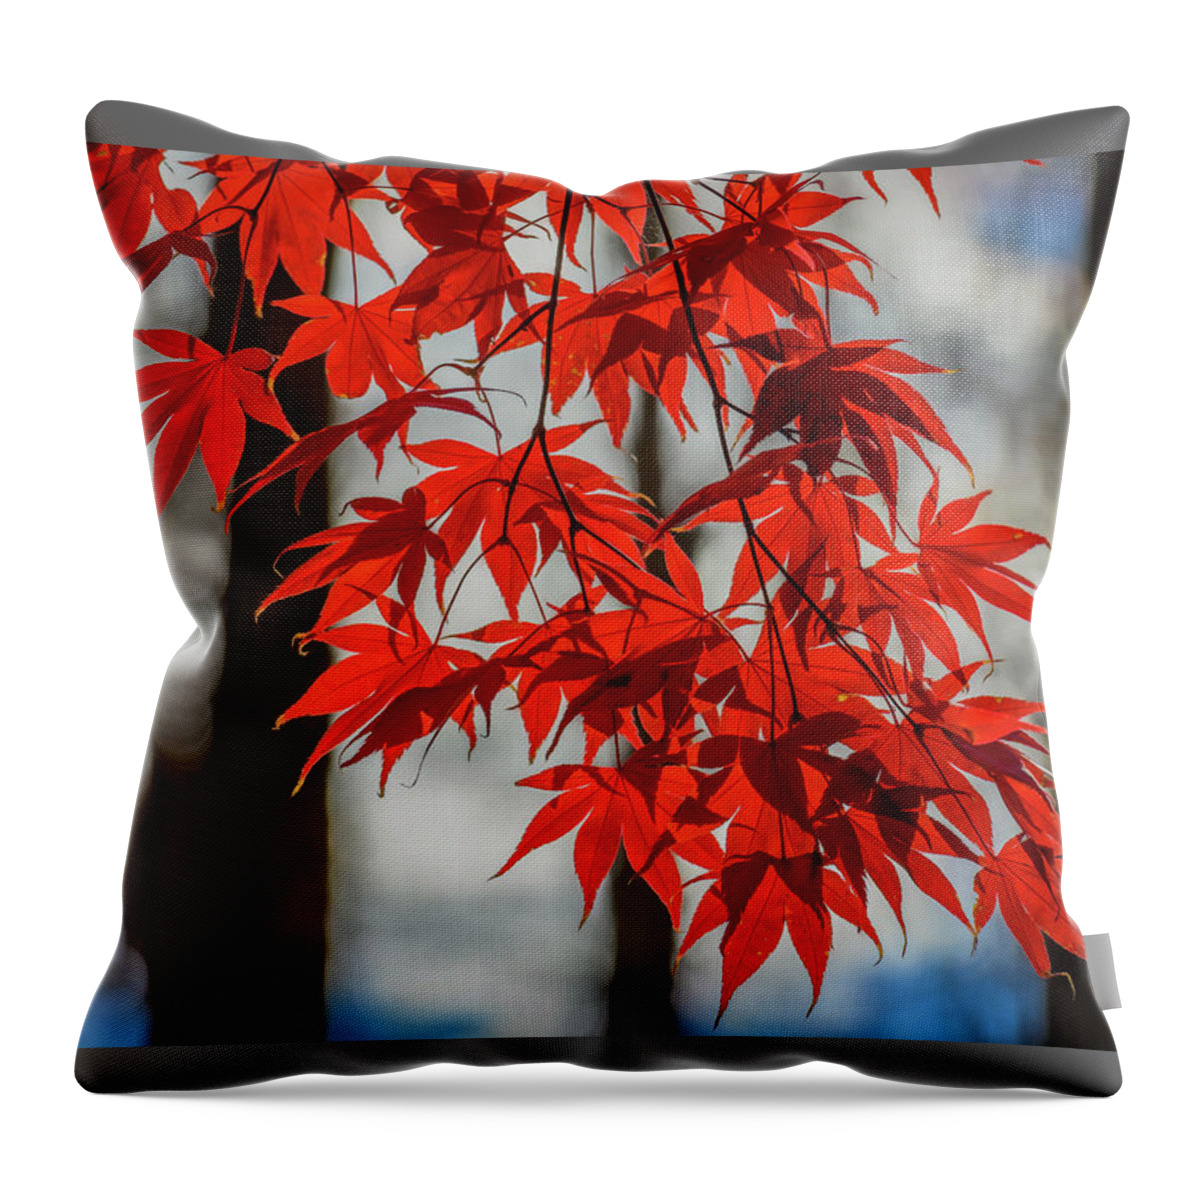 Elm Throw Pillow featuring the photograph Red Leaves by Cindy Lark Hartman